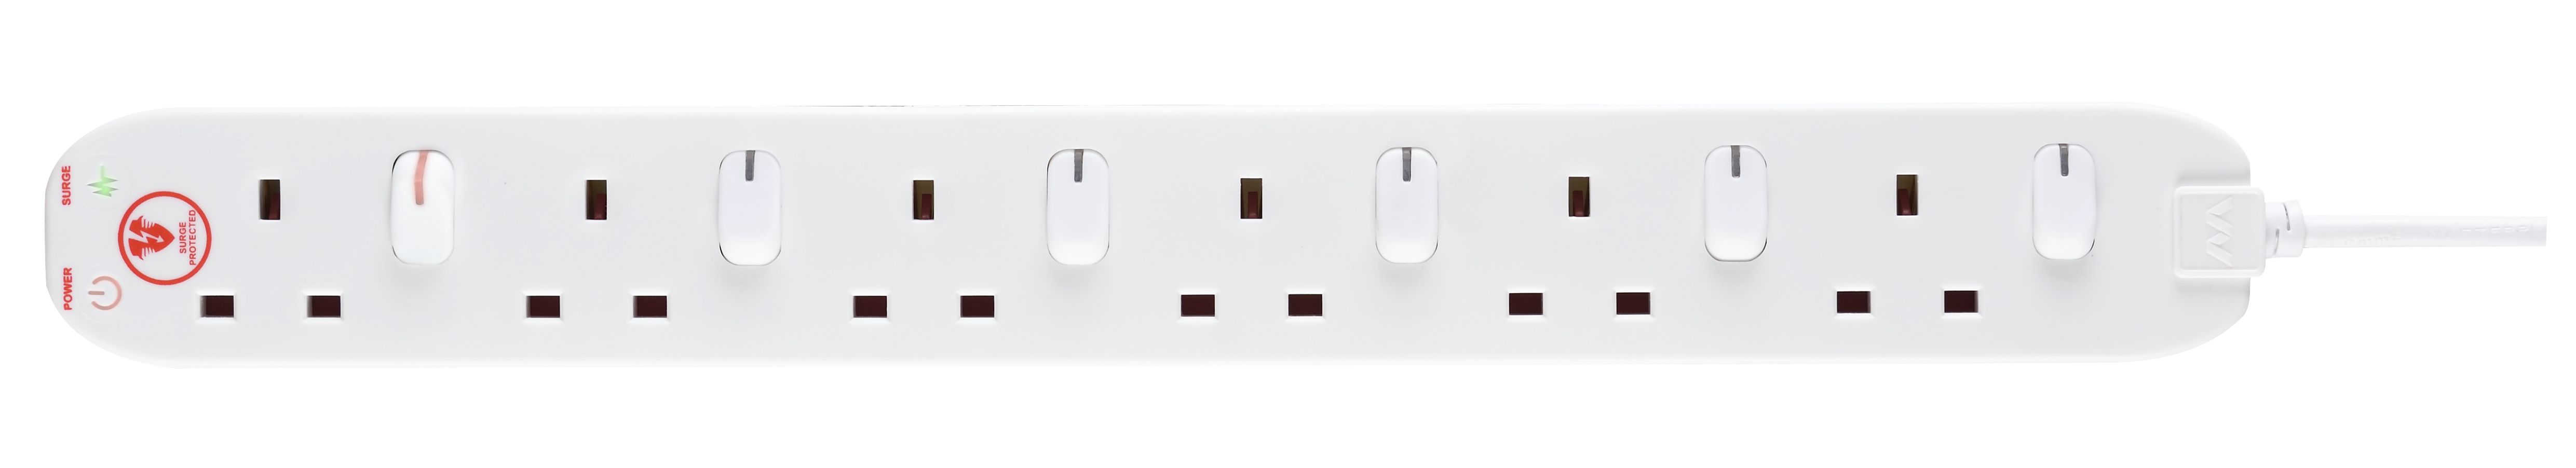 Masterplug 6 socket 13A Switched Surge protected White Extension lead, 2m